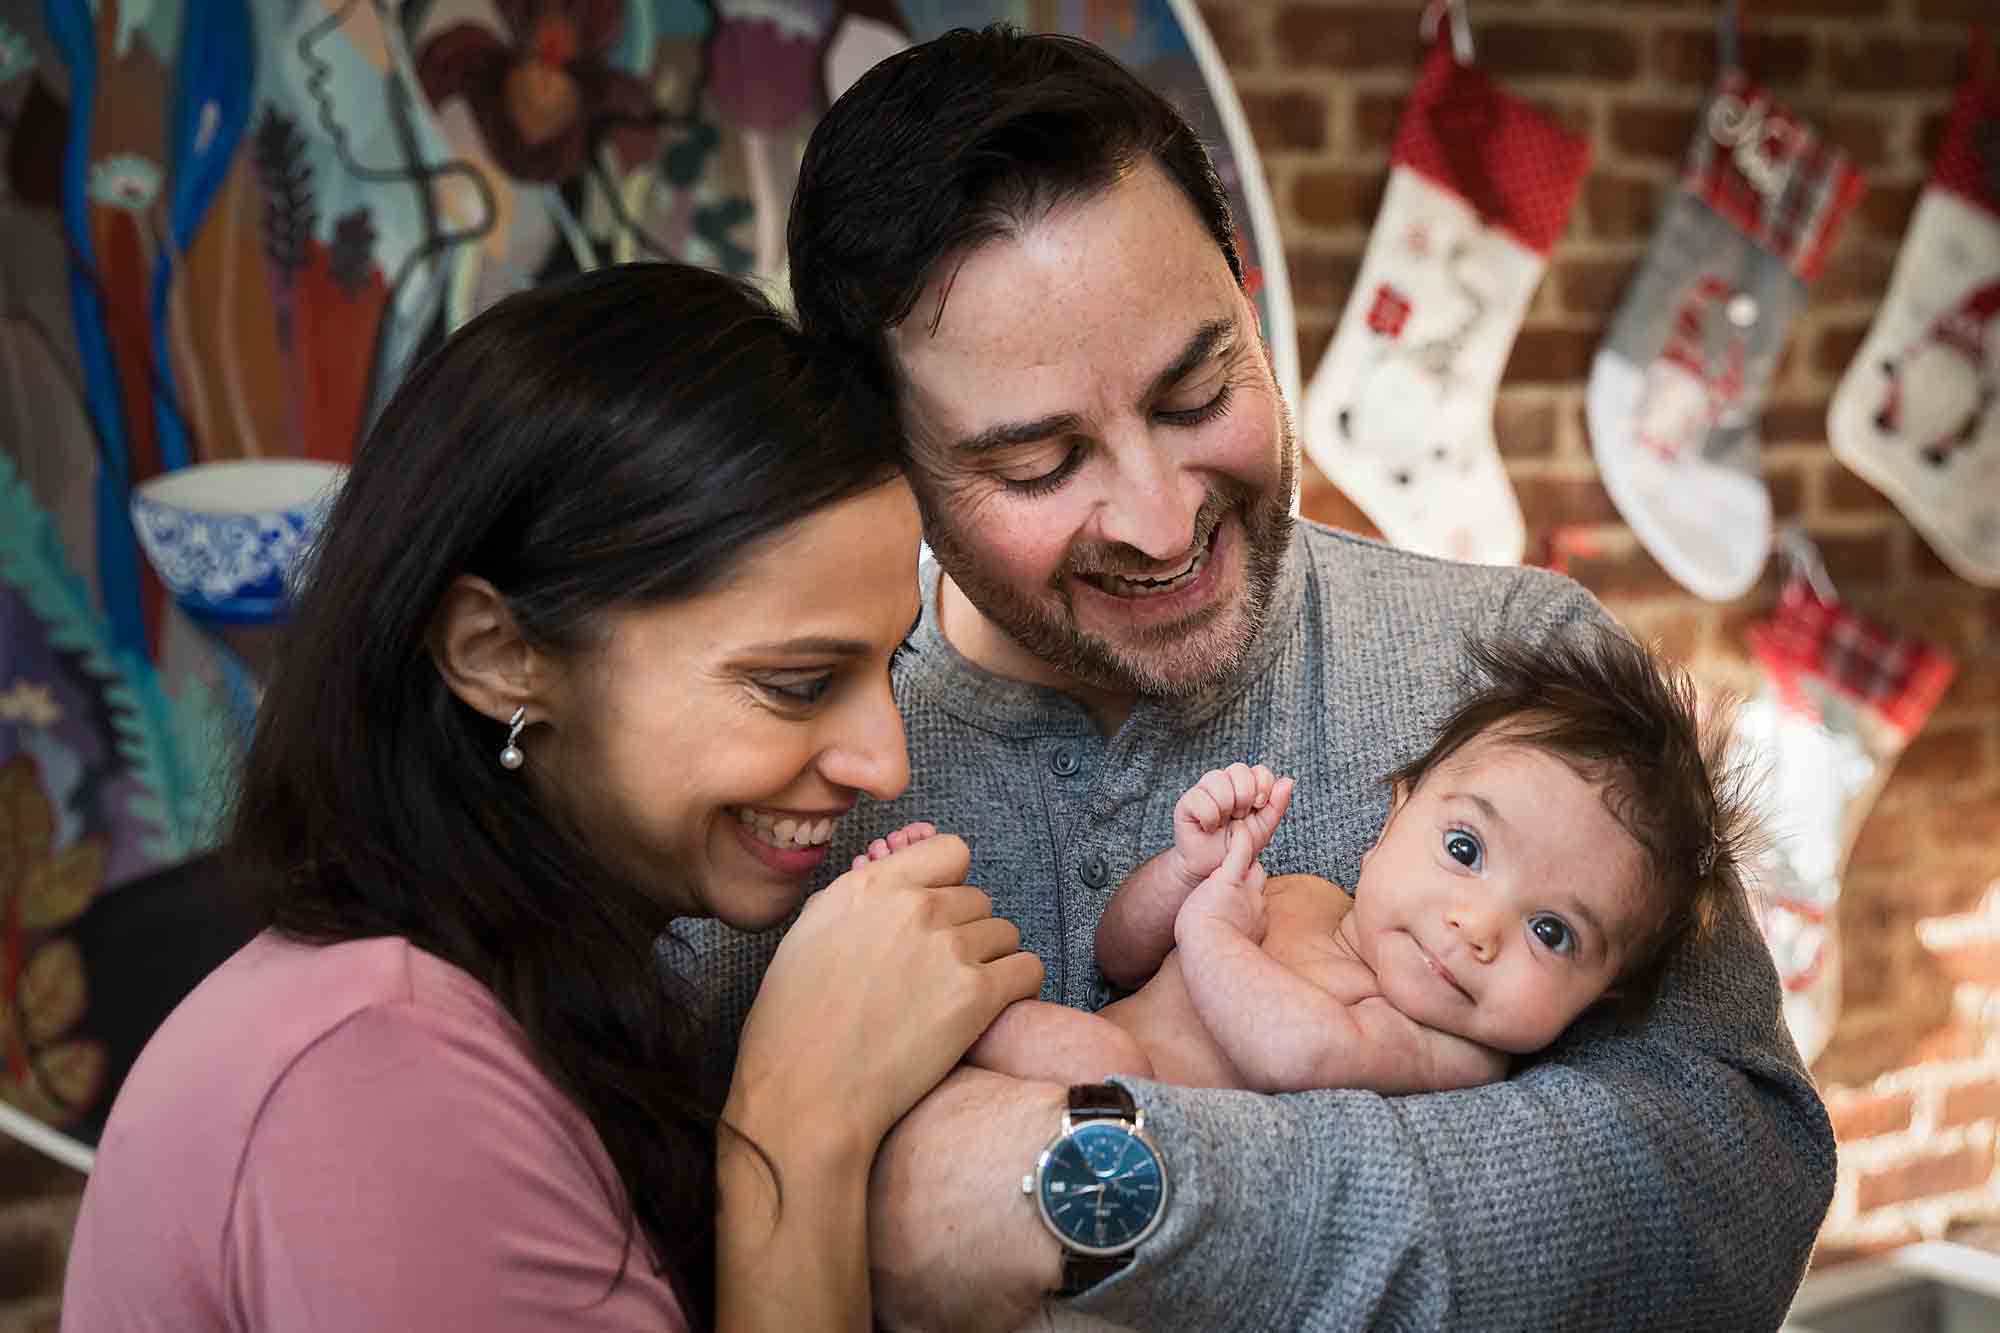 Parents holding newborn baby in front of brick wall